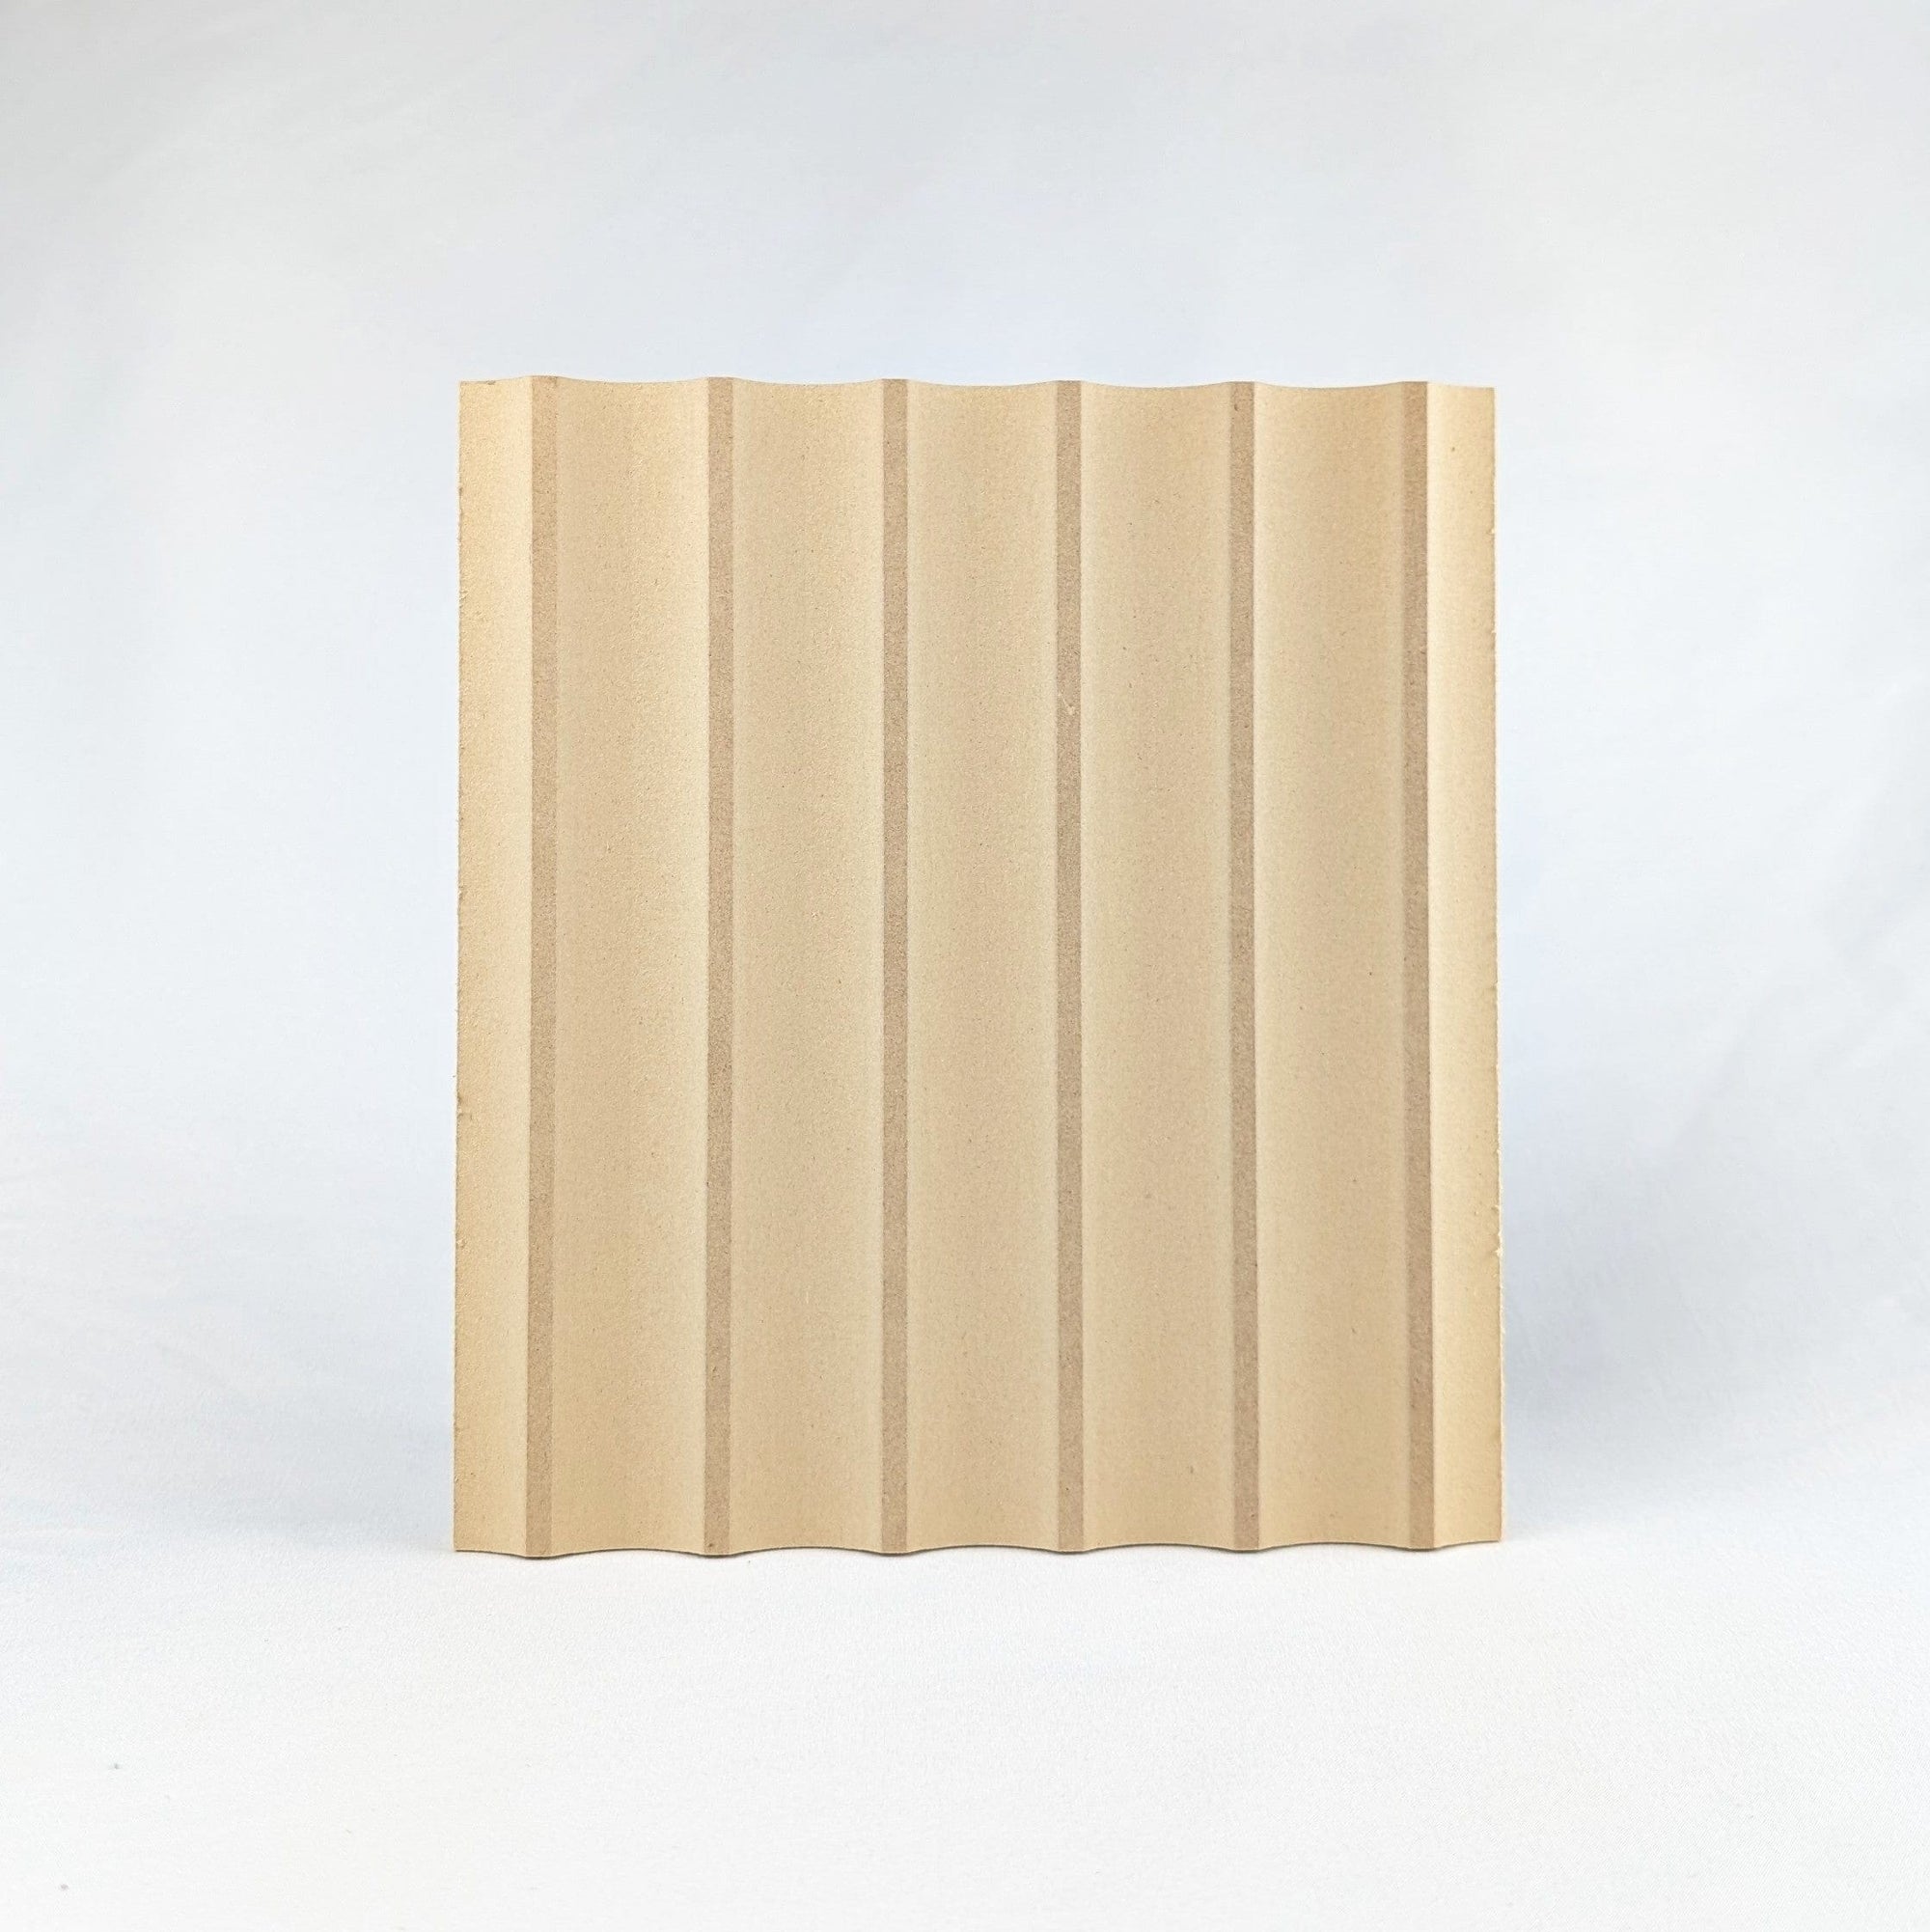 Walston Architectural Products Wall Panel Fluted Wall Panels - 1" Flutes Fluted Wall Panels - 1" Flutes | Walston Door Company